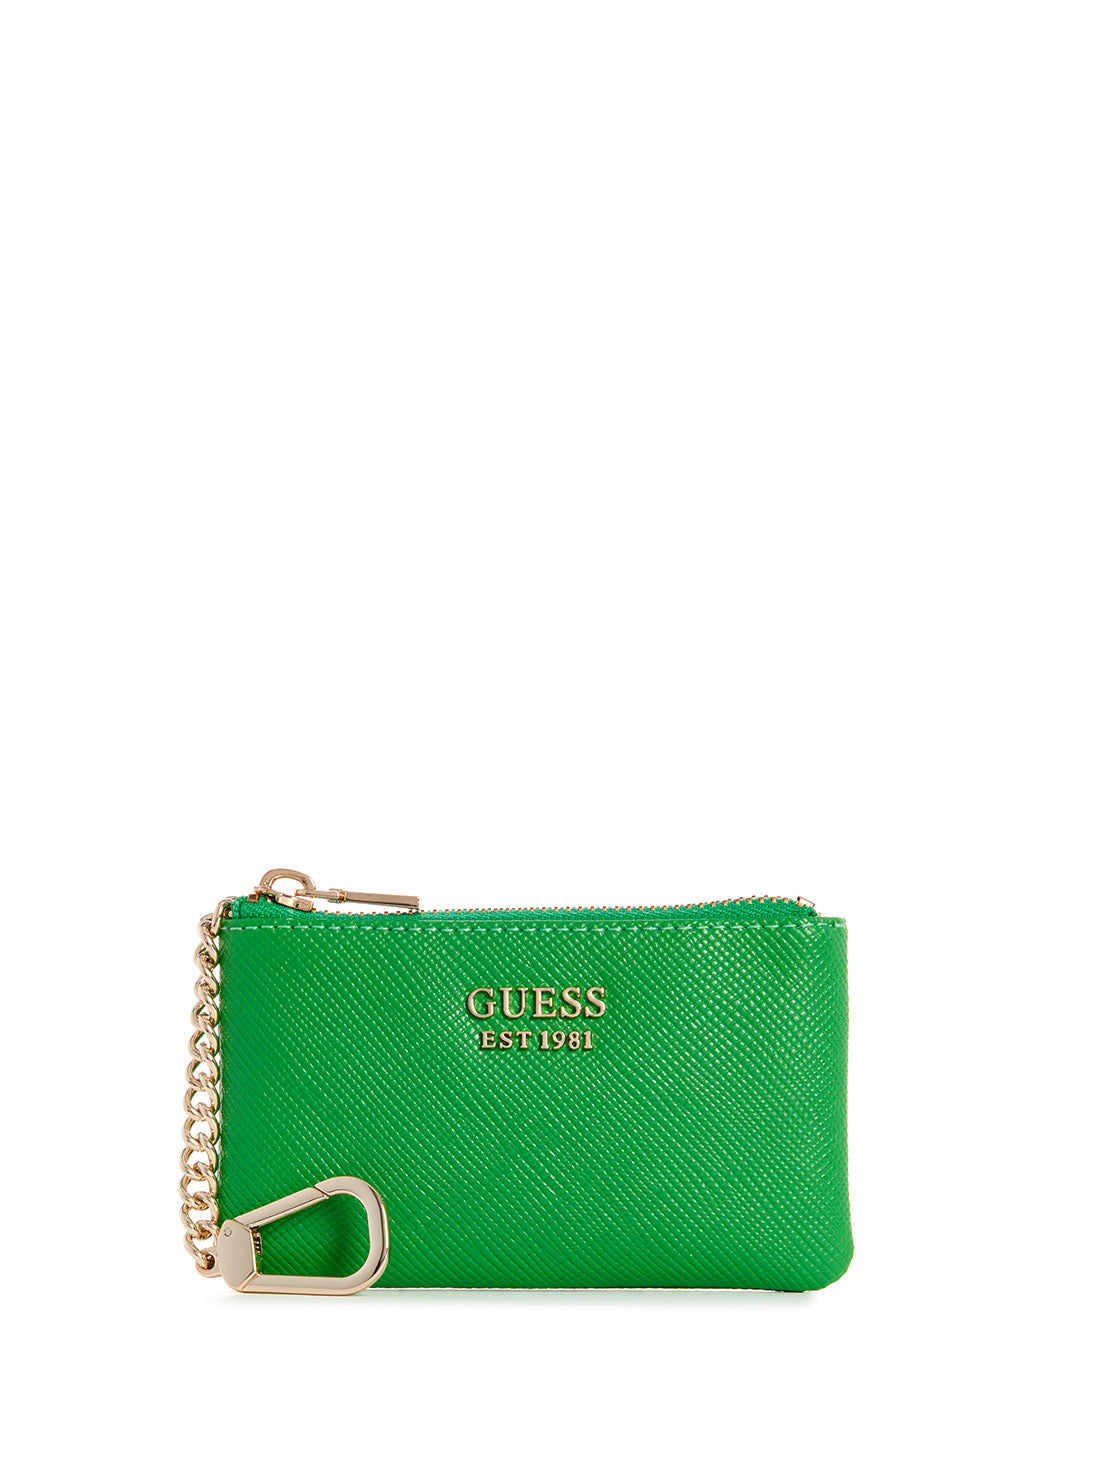 GUESS Green Laurel Zip Pouch front view